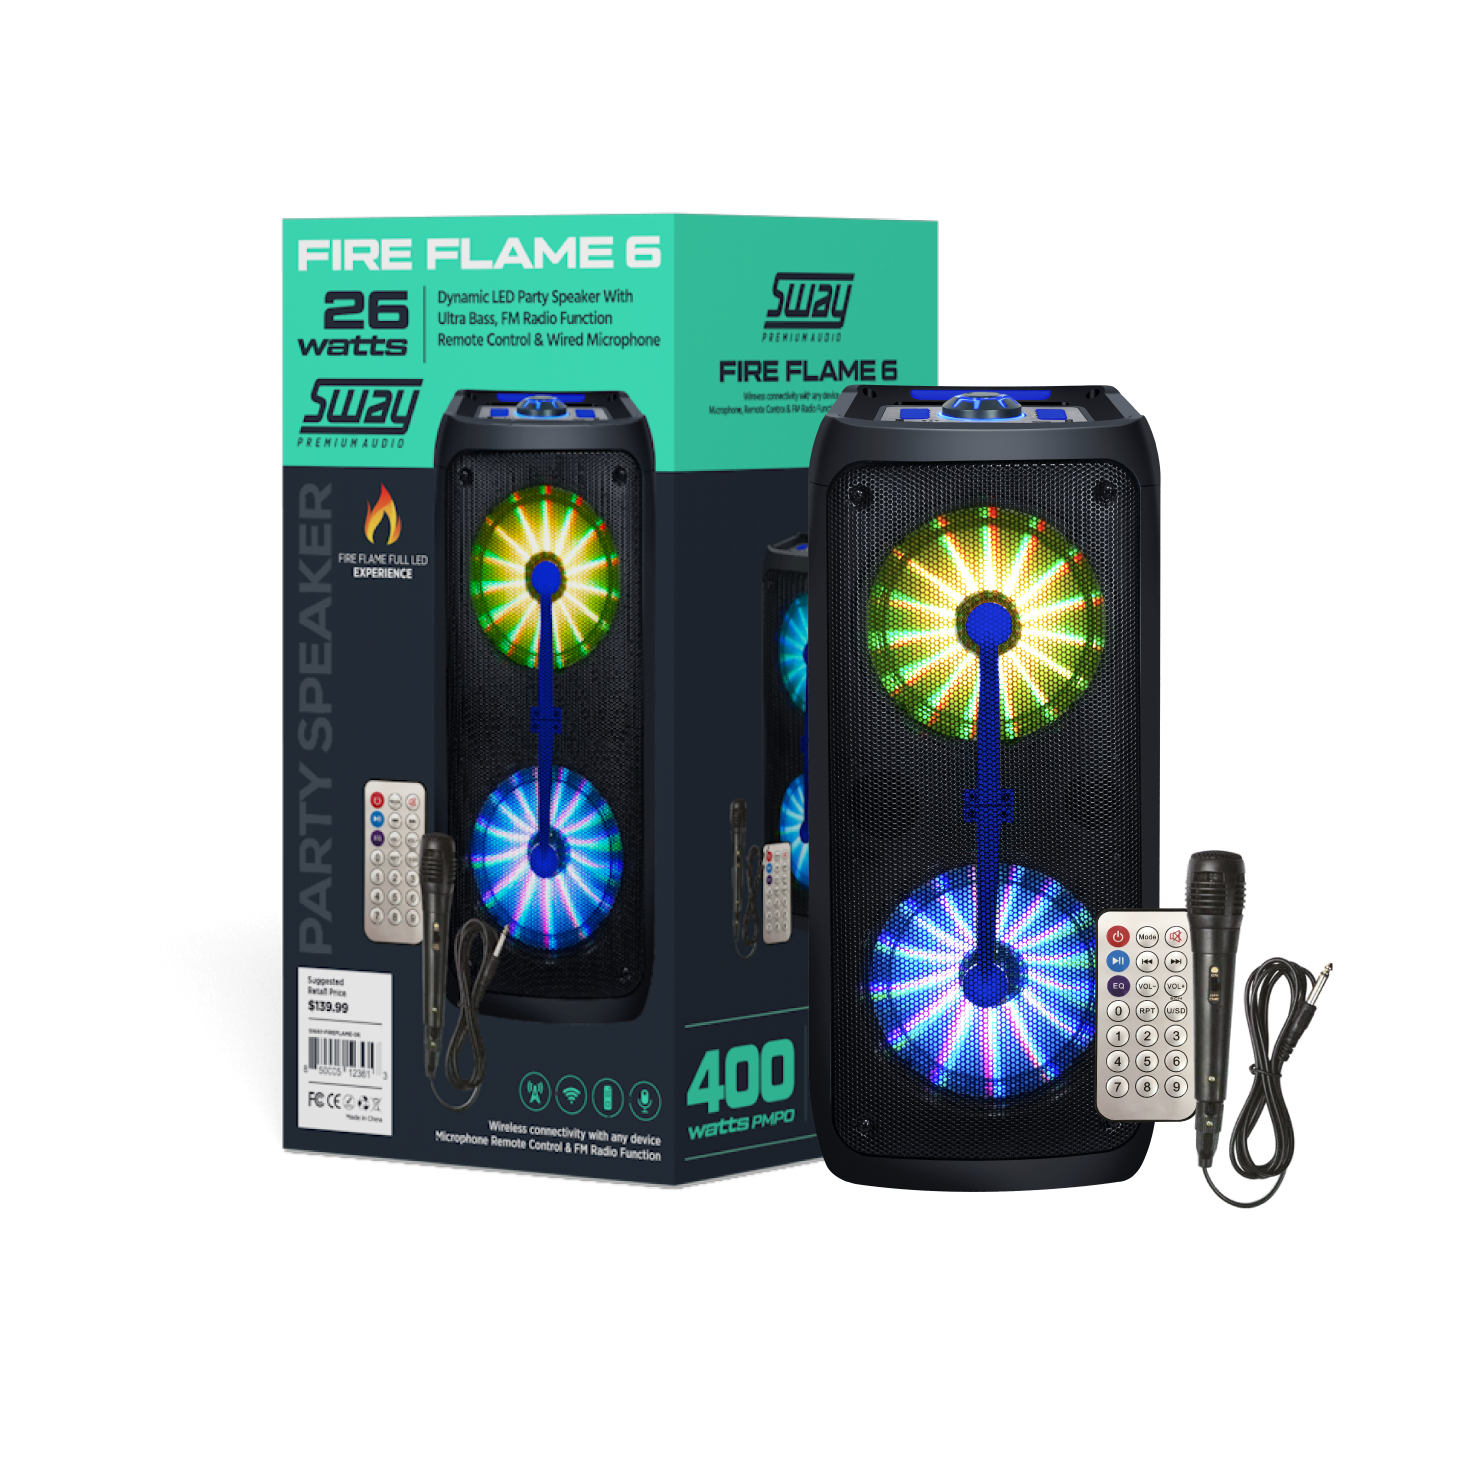 Fire Flame 6 | Karaoke Party Speaker | Full Motion LED / Wired Mic / Remote